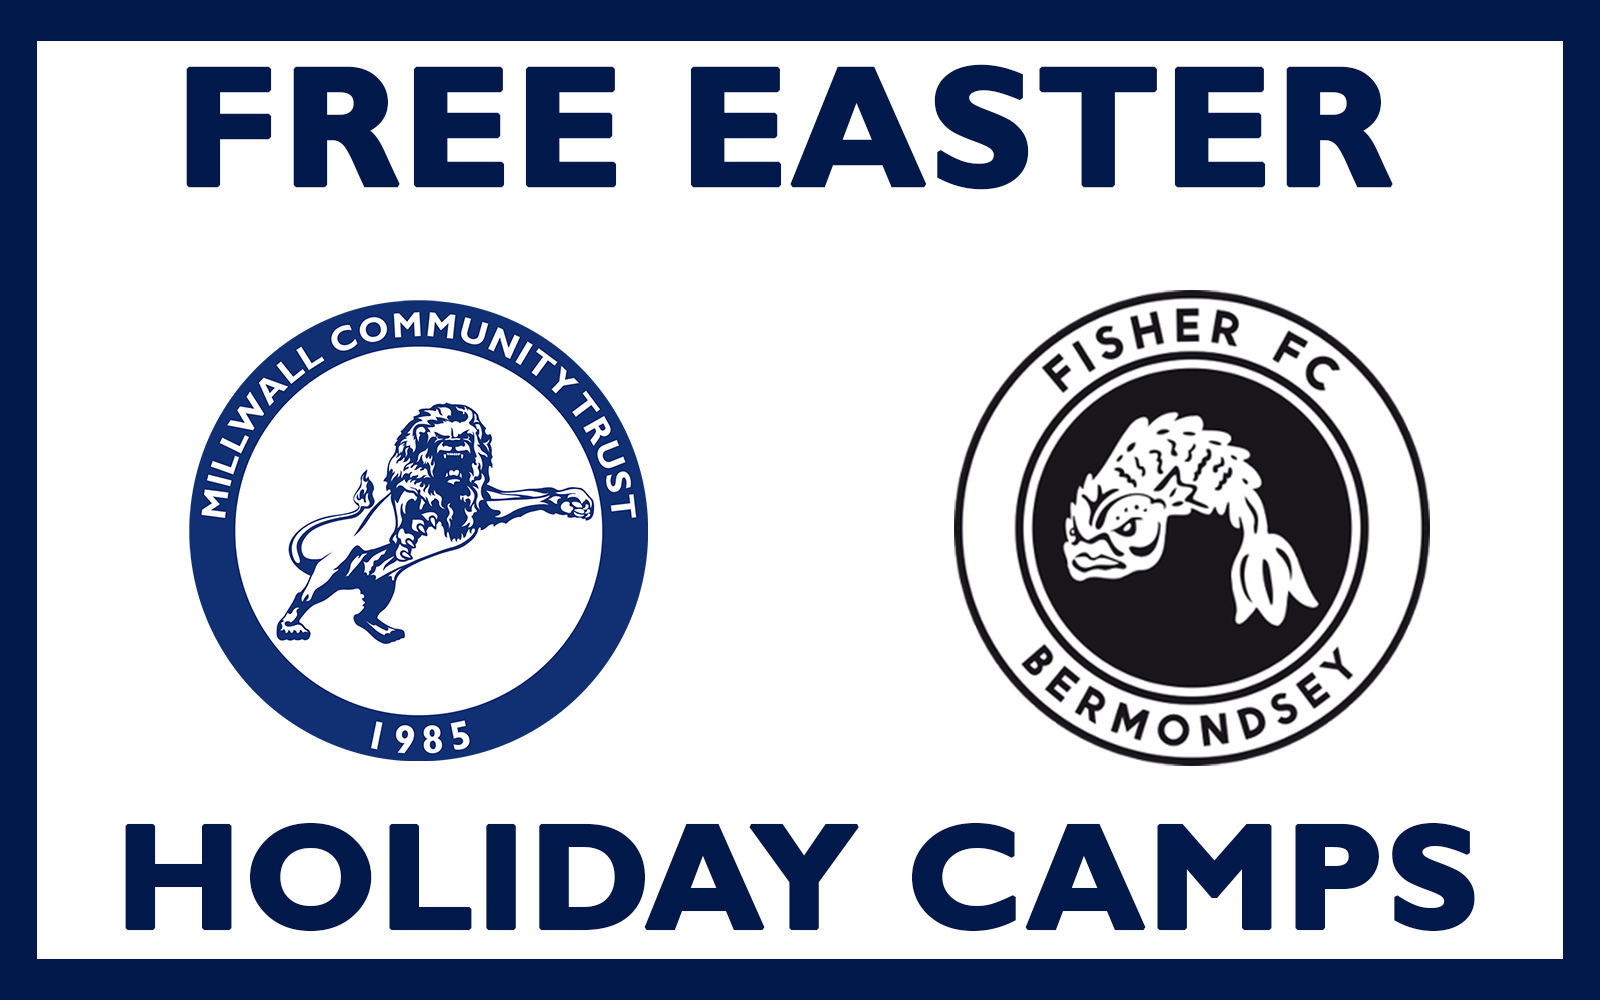 Millwall Community Trust and Fisher FC join forces to offer - FREE Easter sports camps